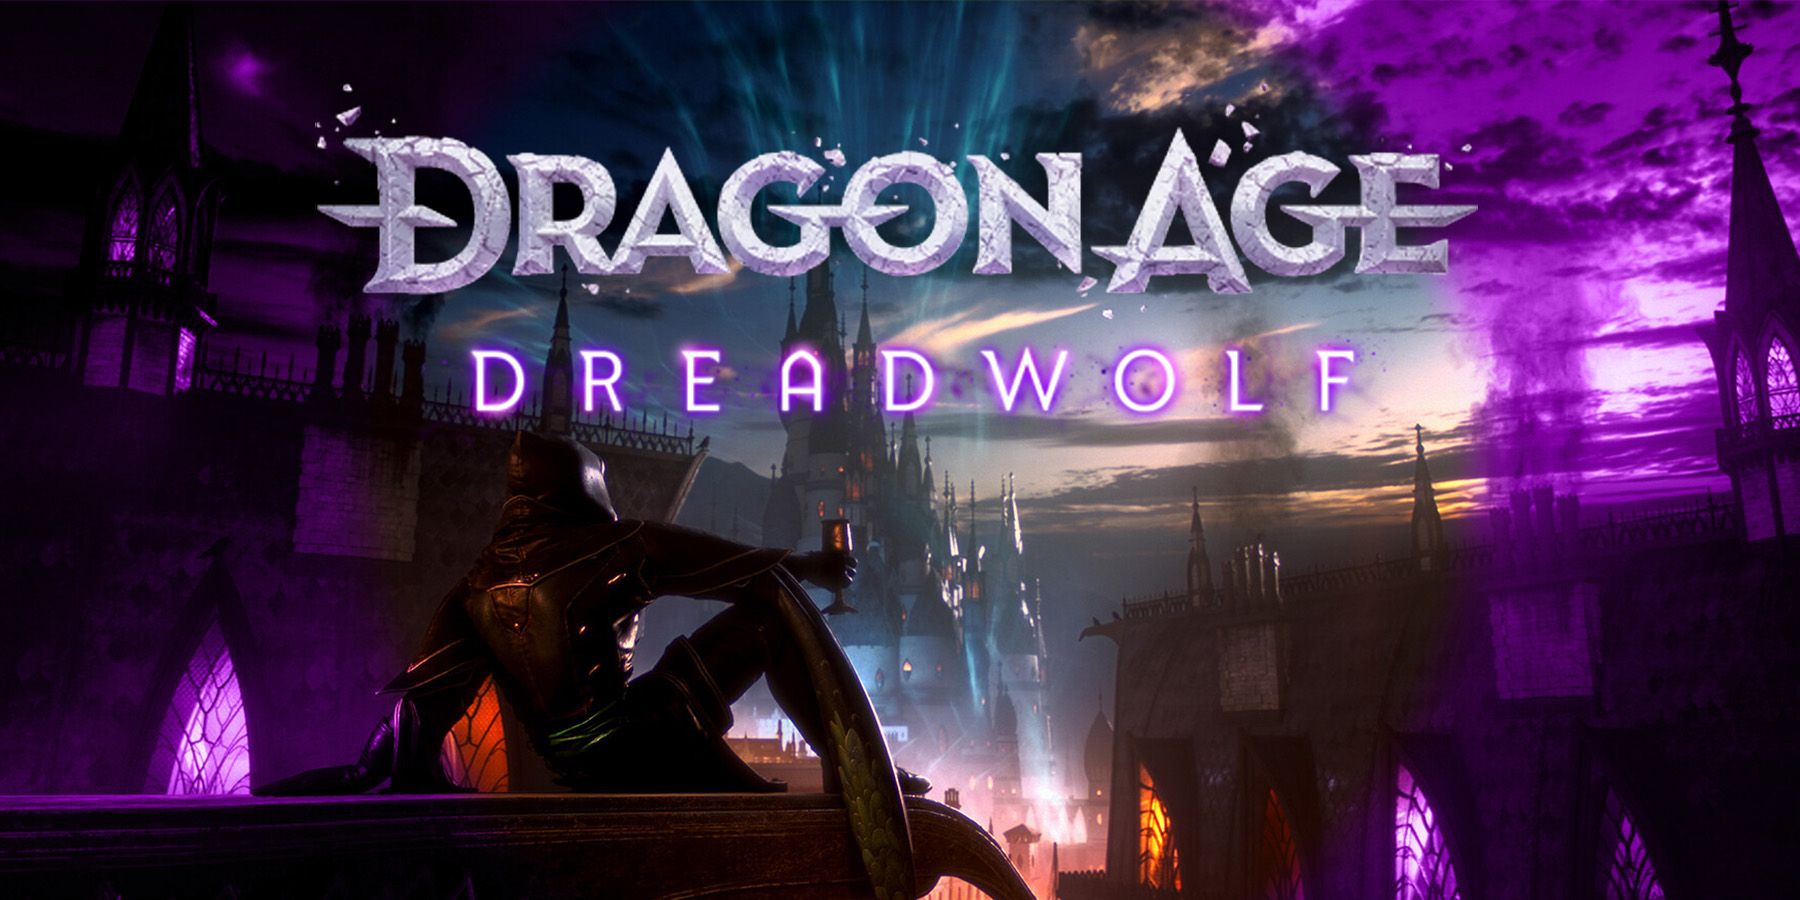 Dragon Age Dreadwolf character sitting on rooftop below game logo selective purple filter edit